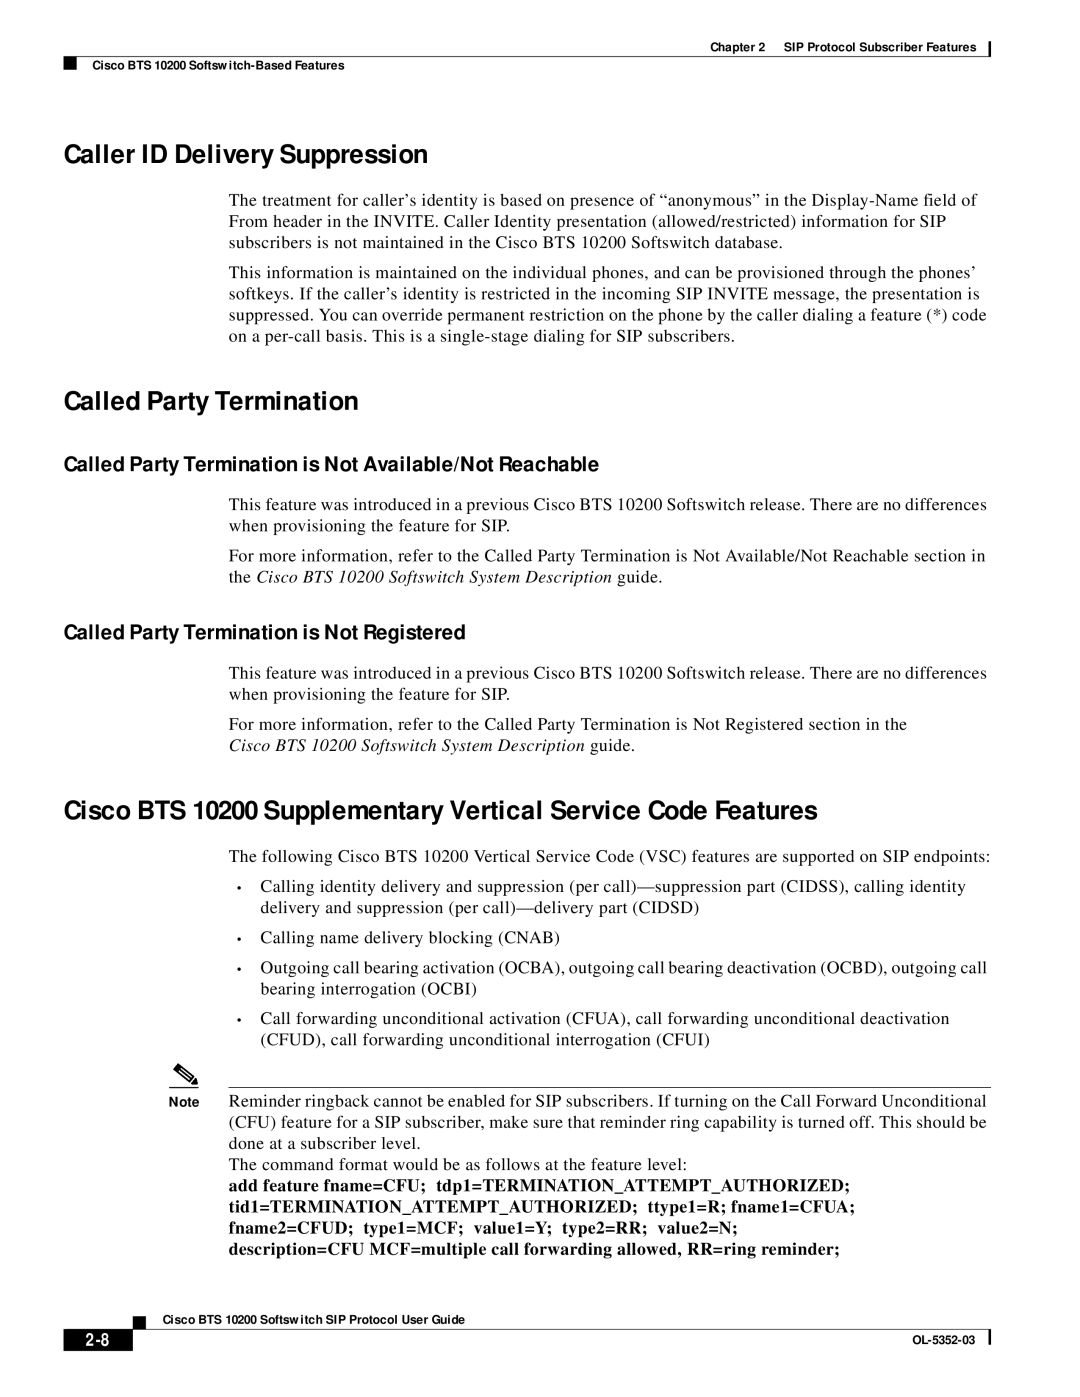 Cisco Systems BTS 10200 manual Caller ID Delivery Suppression, Called Party Termination 